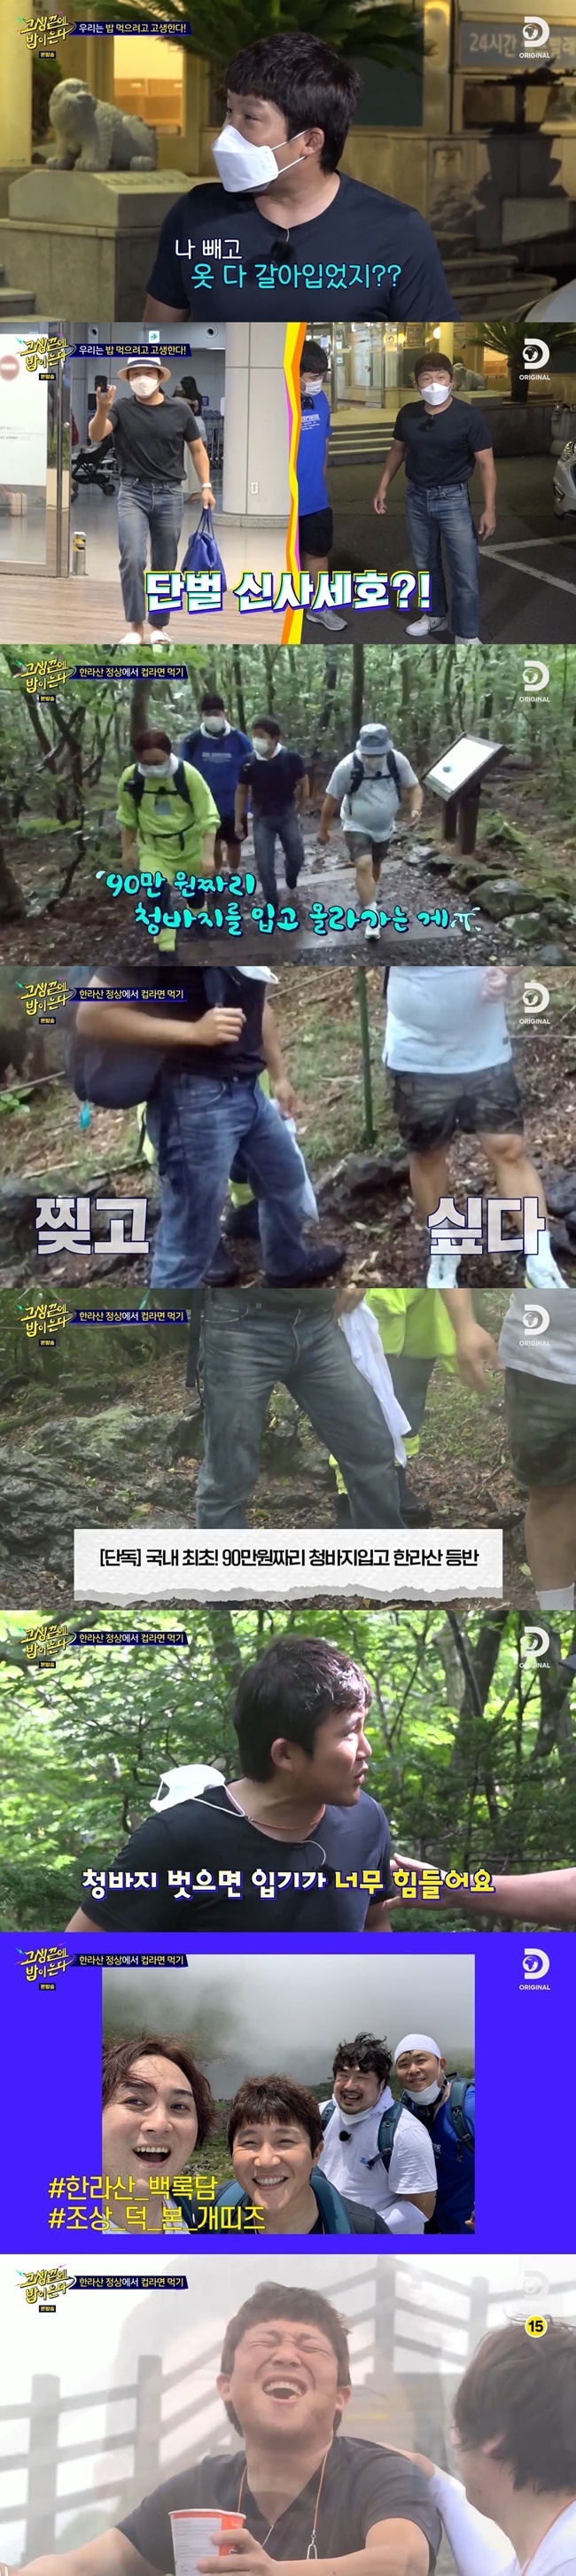 Jo Se-ho succeeded in climbing Hallasan in Luxury pantsThe first meeting of Mun Se-yun, Jo Se-ho, Empire and Kang Jae-joon was drawn in the co-production of NQQ-Discovery Channel Korea, Bob Comes After the Past (hereinafter referred to as Go-Geopbap), which was first broadcast on August 31.Jo Se-ho said on his first shot at Jeju Island, I want to eat black pork.I want to eat omegi rice cake for abalone tukbaegi, sea urchin bibimbap, meat noodles, grilled raccoon, and dessert. When Kang Jae-joon asked, Can I drink soju briefly? The production team asked, I can drink it, but will it be okay tomorrow? Kang Jae-joon, who was embarrassed, appealed for frustration.Mun Se-yun, Empire, Jo Se-ho and Kang Jae-joon gathered in Jeju Island ate the night and reasoned the schedule the next day.Then, he came up with various ideas such as building stone walls and cleaning the sea. I want to go while playing like this, Emperor sighed.The next day, the crew started the schedule by waking up the members from 4 am, and Jo Se-ho said, Did you change your clothes except me?I came here because I asked him to wear it comfortably. What employer did you wear? grumbled Emperor, who saw the Luxury Blue Jeans of Jo Se-ho.The identity of the finally-released schedule was the Hallasan climb, with Jo Se-ho despairing: Whos coming to Hallasan, Im like a madman.The first menu was also cup noodles at Hallasan settlement; the crew provided basic climbing supplies and small cup noodles.Mun Se-yun checked the small cup noodles and said, I do not ask because I am fat, but what is this espresso?As the full-scale hike began, Jo Se-ho said, Its so funny to be wearing a 900,000-one Blue Jeans.This is not the pants I made to wear on the mountain. But the climbing was delayed in the rain that continued to pour. Jo Se-ho was angry that he wanted to tear the Blue Jeans.Emperor responded, It will be the first time in Korea to climb in a pair of 900,000 One pants.Jo Se-ho expressed his anger at the damp blue jeans but said, I hope Blue jeans commercials will come in.Mun Se-yun said, It was said that you should not wear shoes or slippers at the beginning of the trail, but now Jo Se-ho will cause a ban on entry to blue jeans.